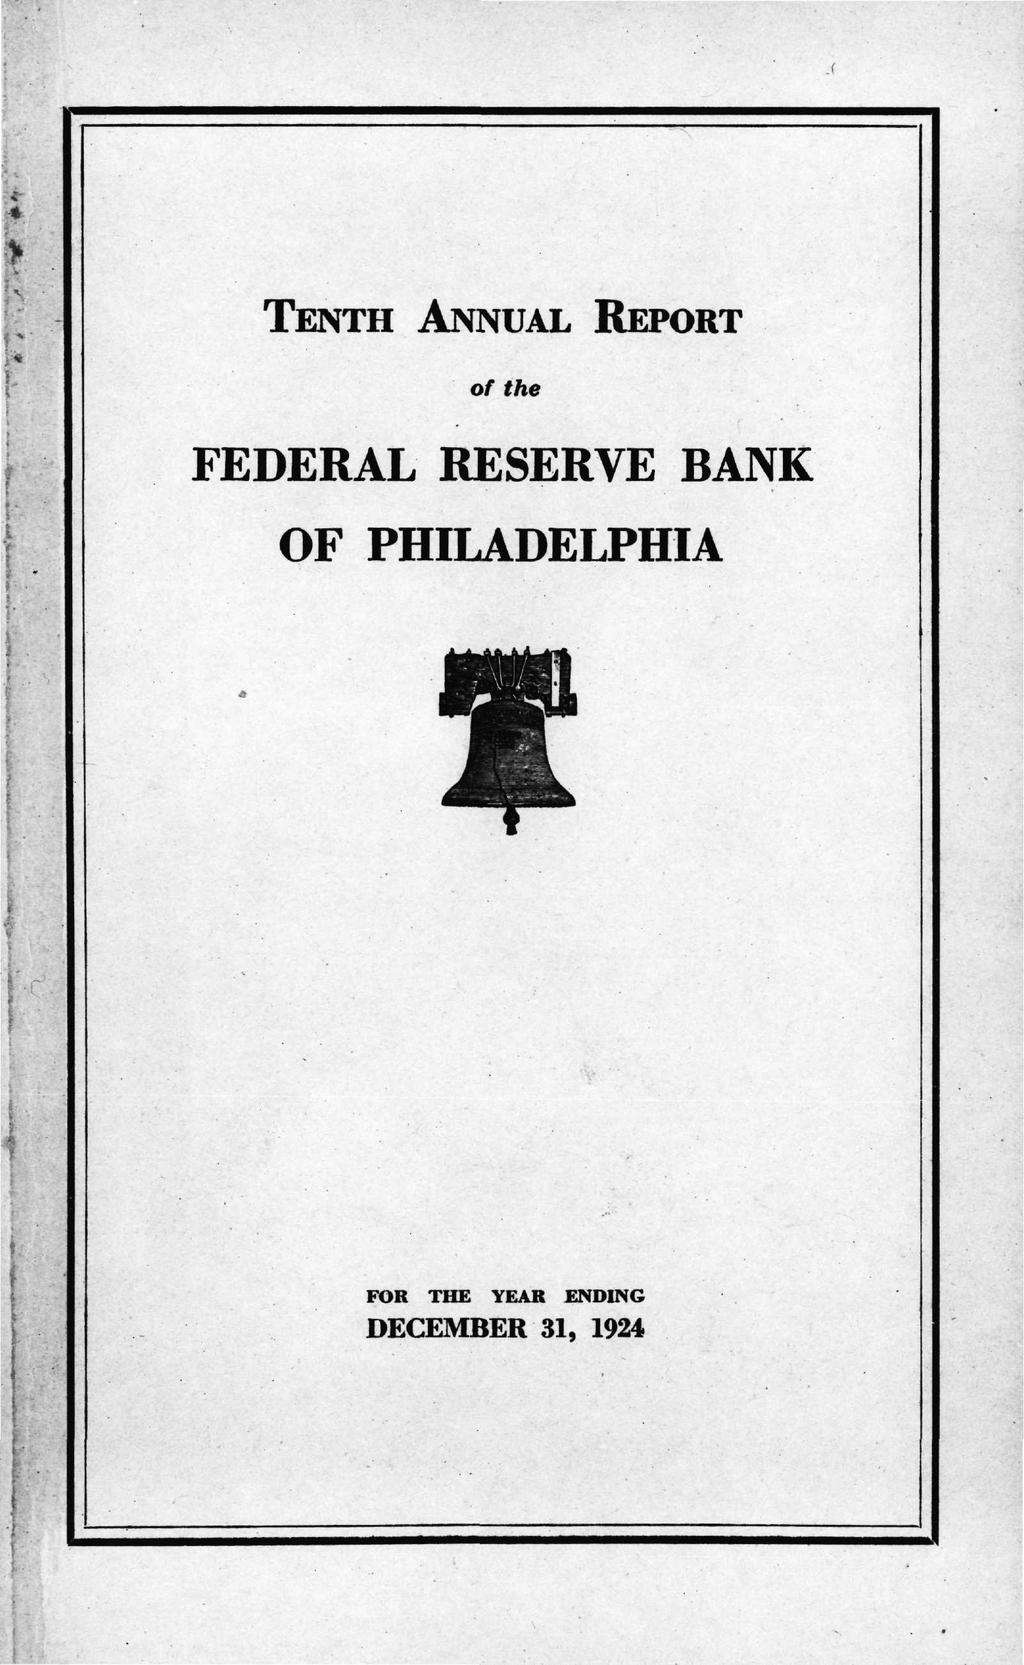 TENTH ANNUAL REPORT of the FEDERAL RESERVE BANK OF